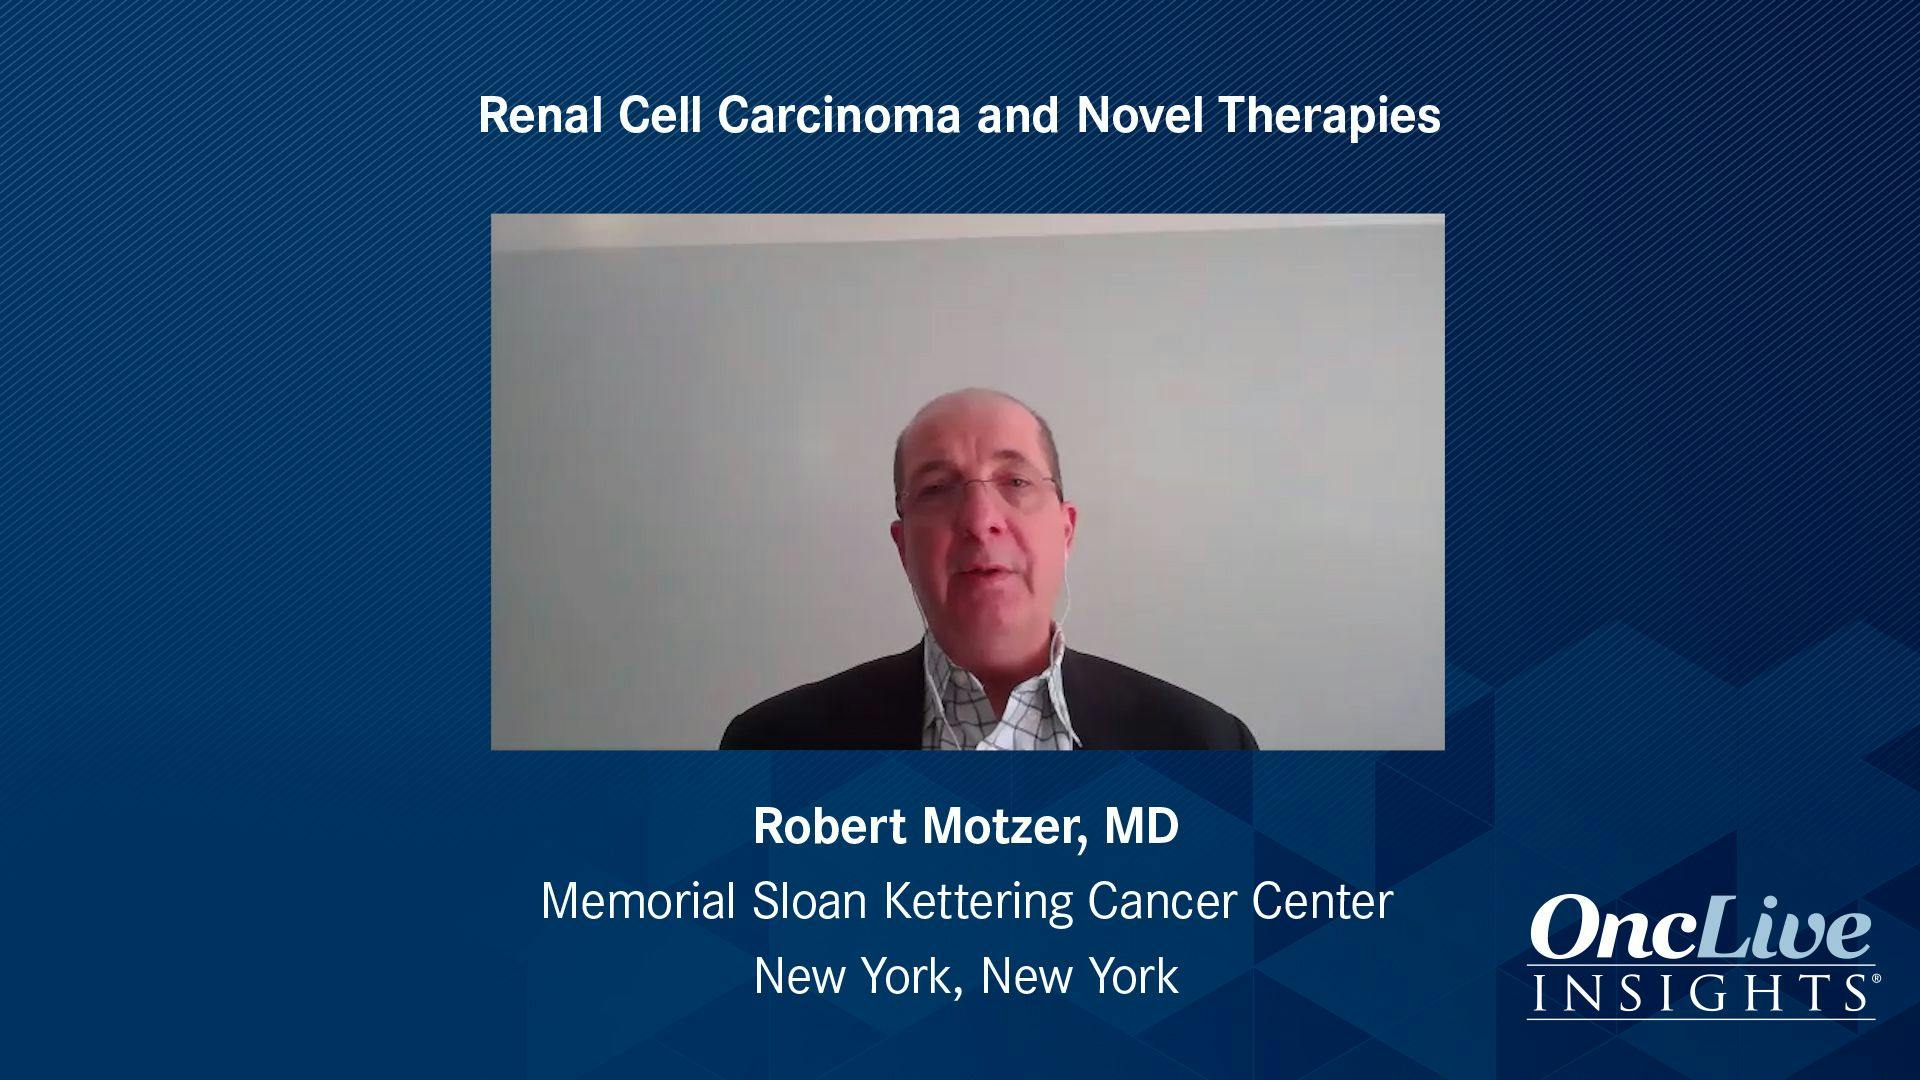 Treatment Options in Metastatic Renal Cell Carcinoma